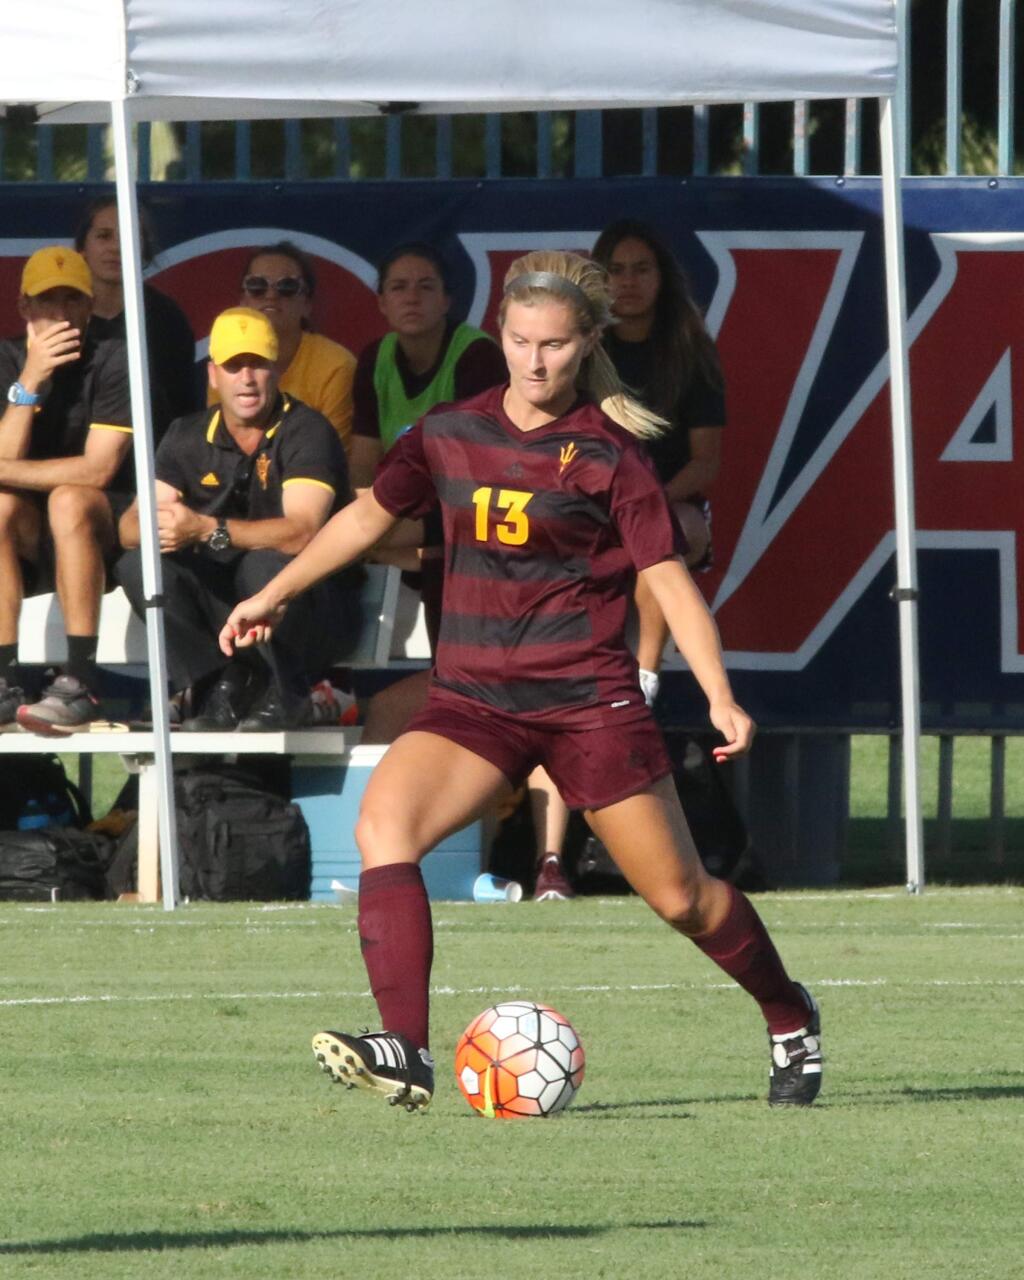 Sara Tosti, who played soccer for Maria Carrillo High School in Santa Rosa before attending Arizona State University, is now on a European team.